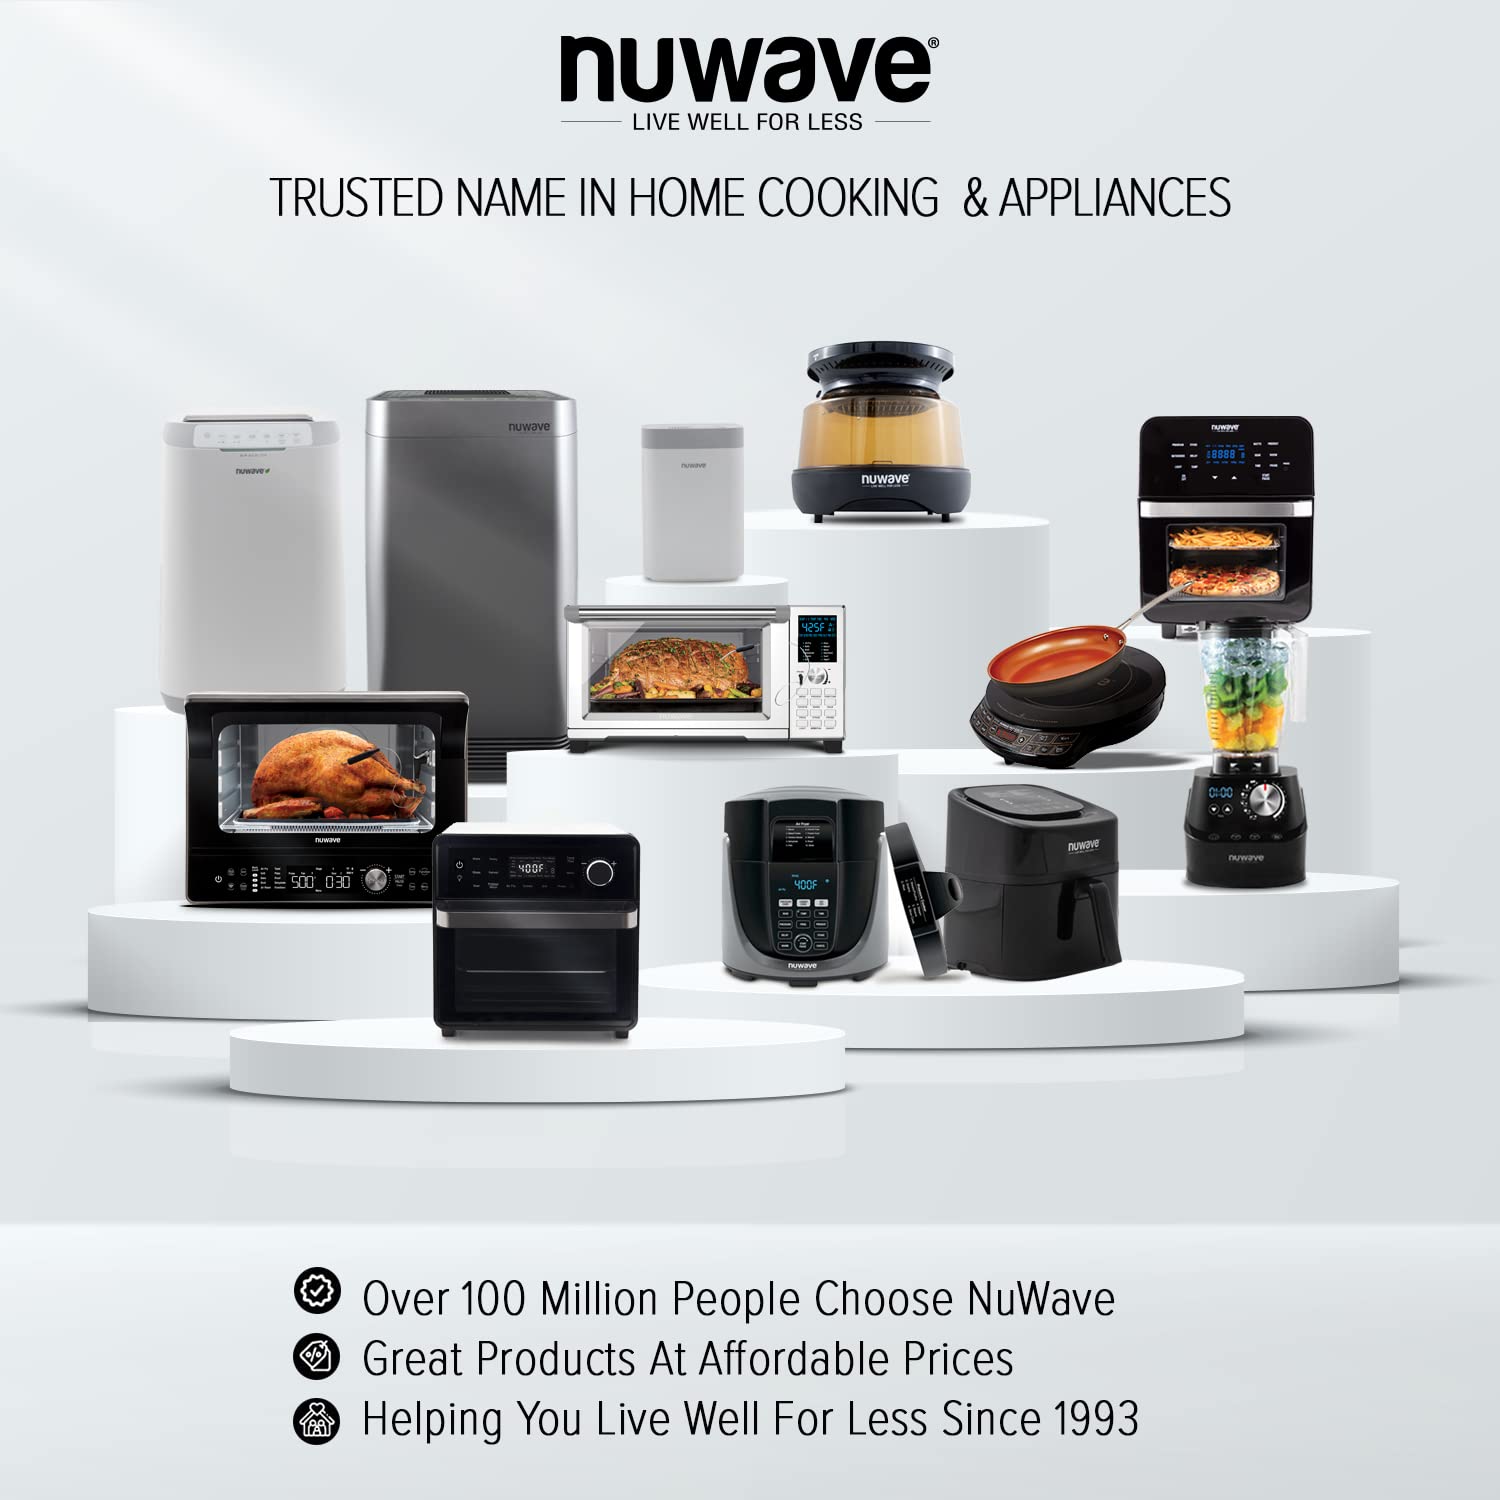 Nuwave Double Induction Cooktop, Powerful 1800W, 2 Large 8” Heating Coils, Independent Controls, 94 Temp Settings from 100°F to 575°F in 5°F Increments, 2 x 11.5” Shatter-Proof Ceramic Glass Surface